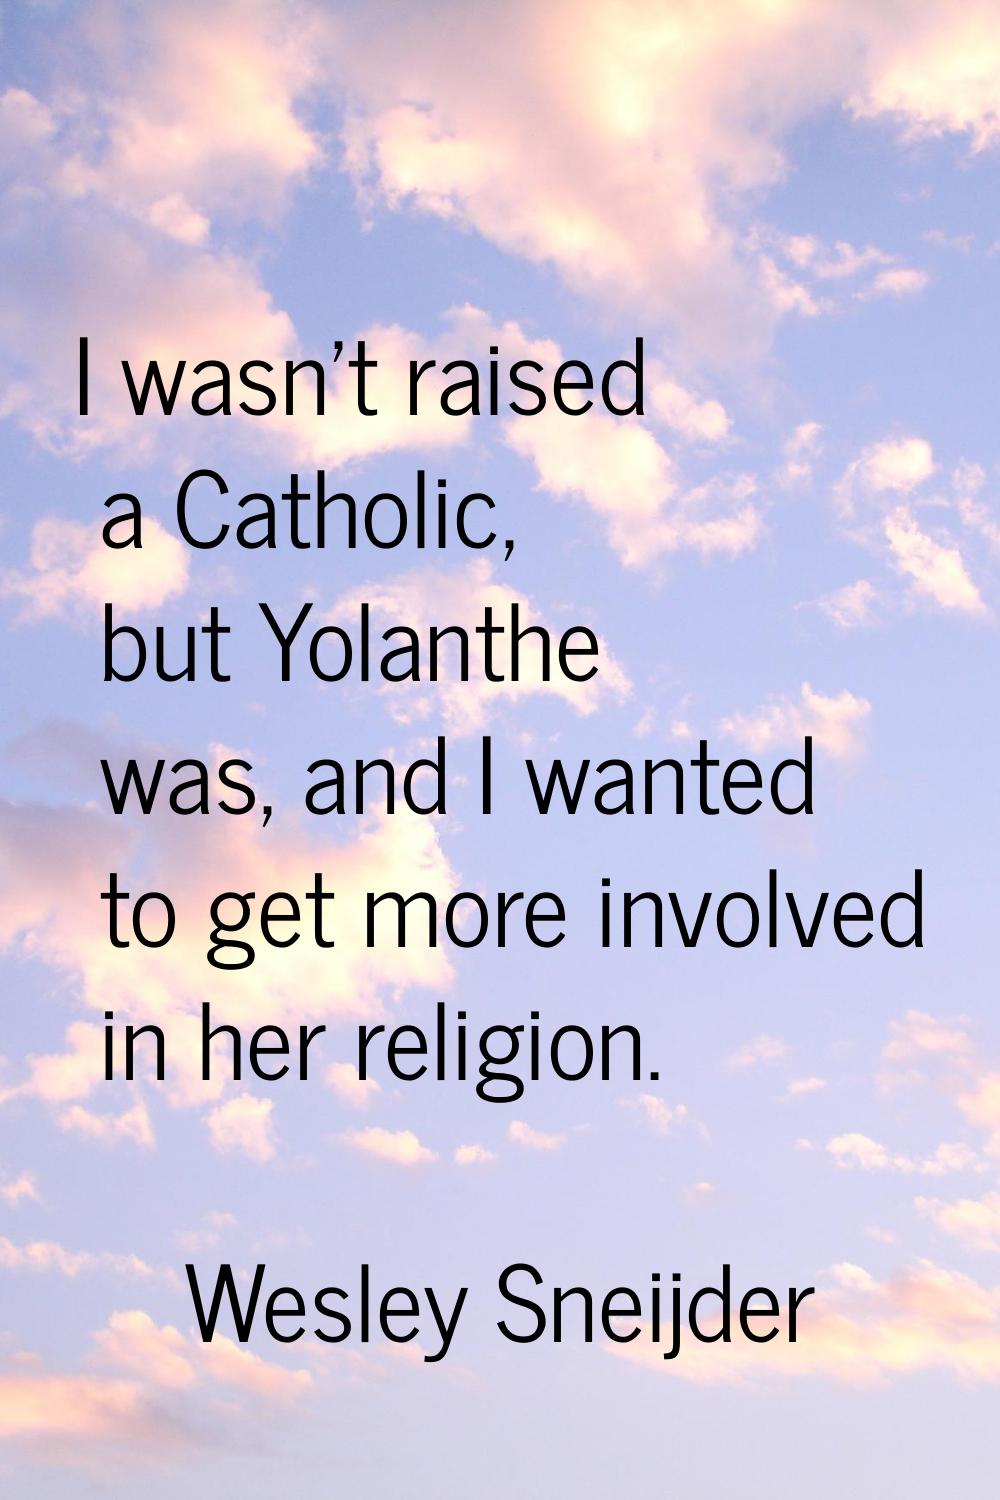 I wasn't raised a Catholic, but Yolanthe was, and I wanted to get more involved in her religion.